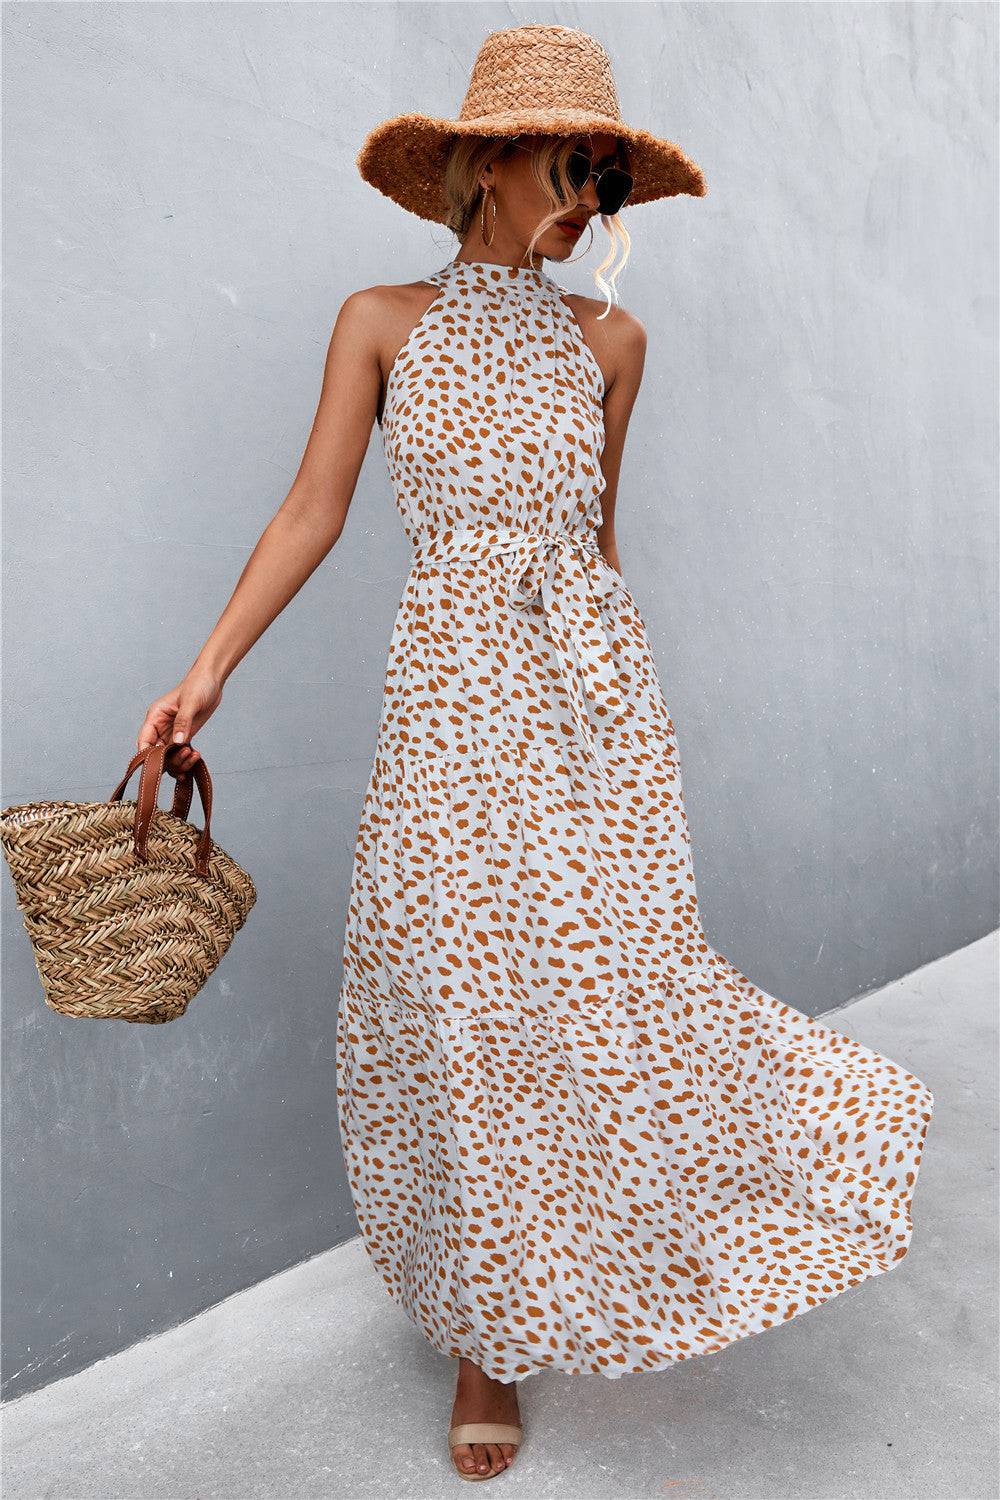 Enchantress Printed Maxi Dress - Embrace the Magic of Love with our Dreamy Grecian Dress - Feel Like a Fairytale Princess in Every Moment - Guy Christopher